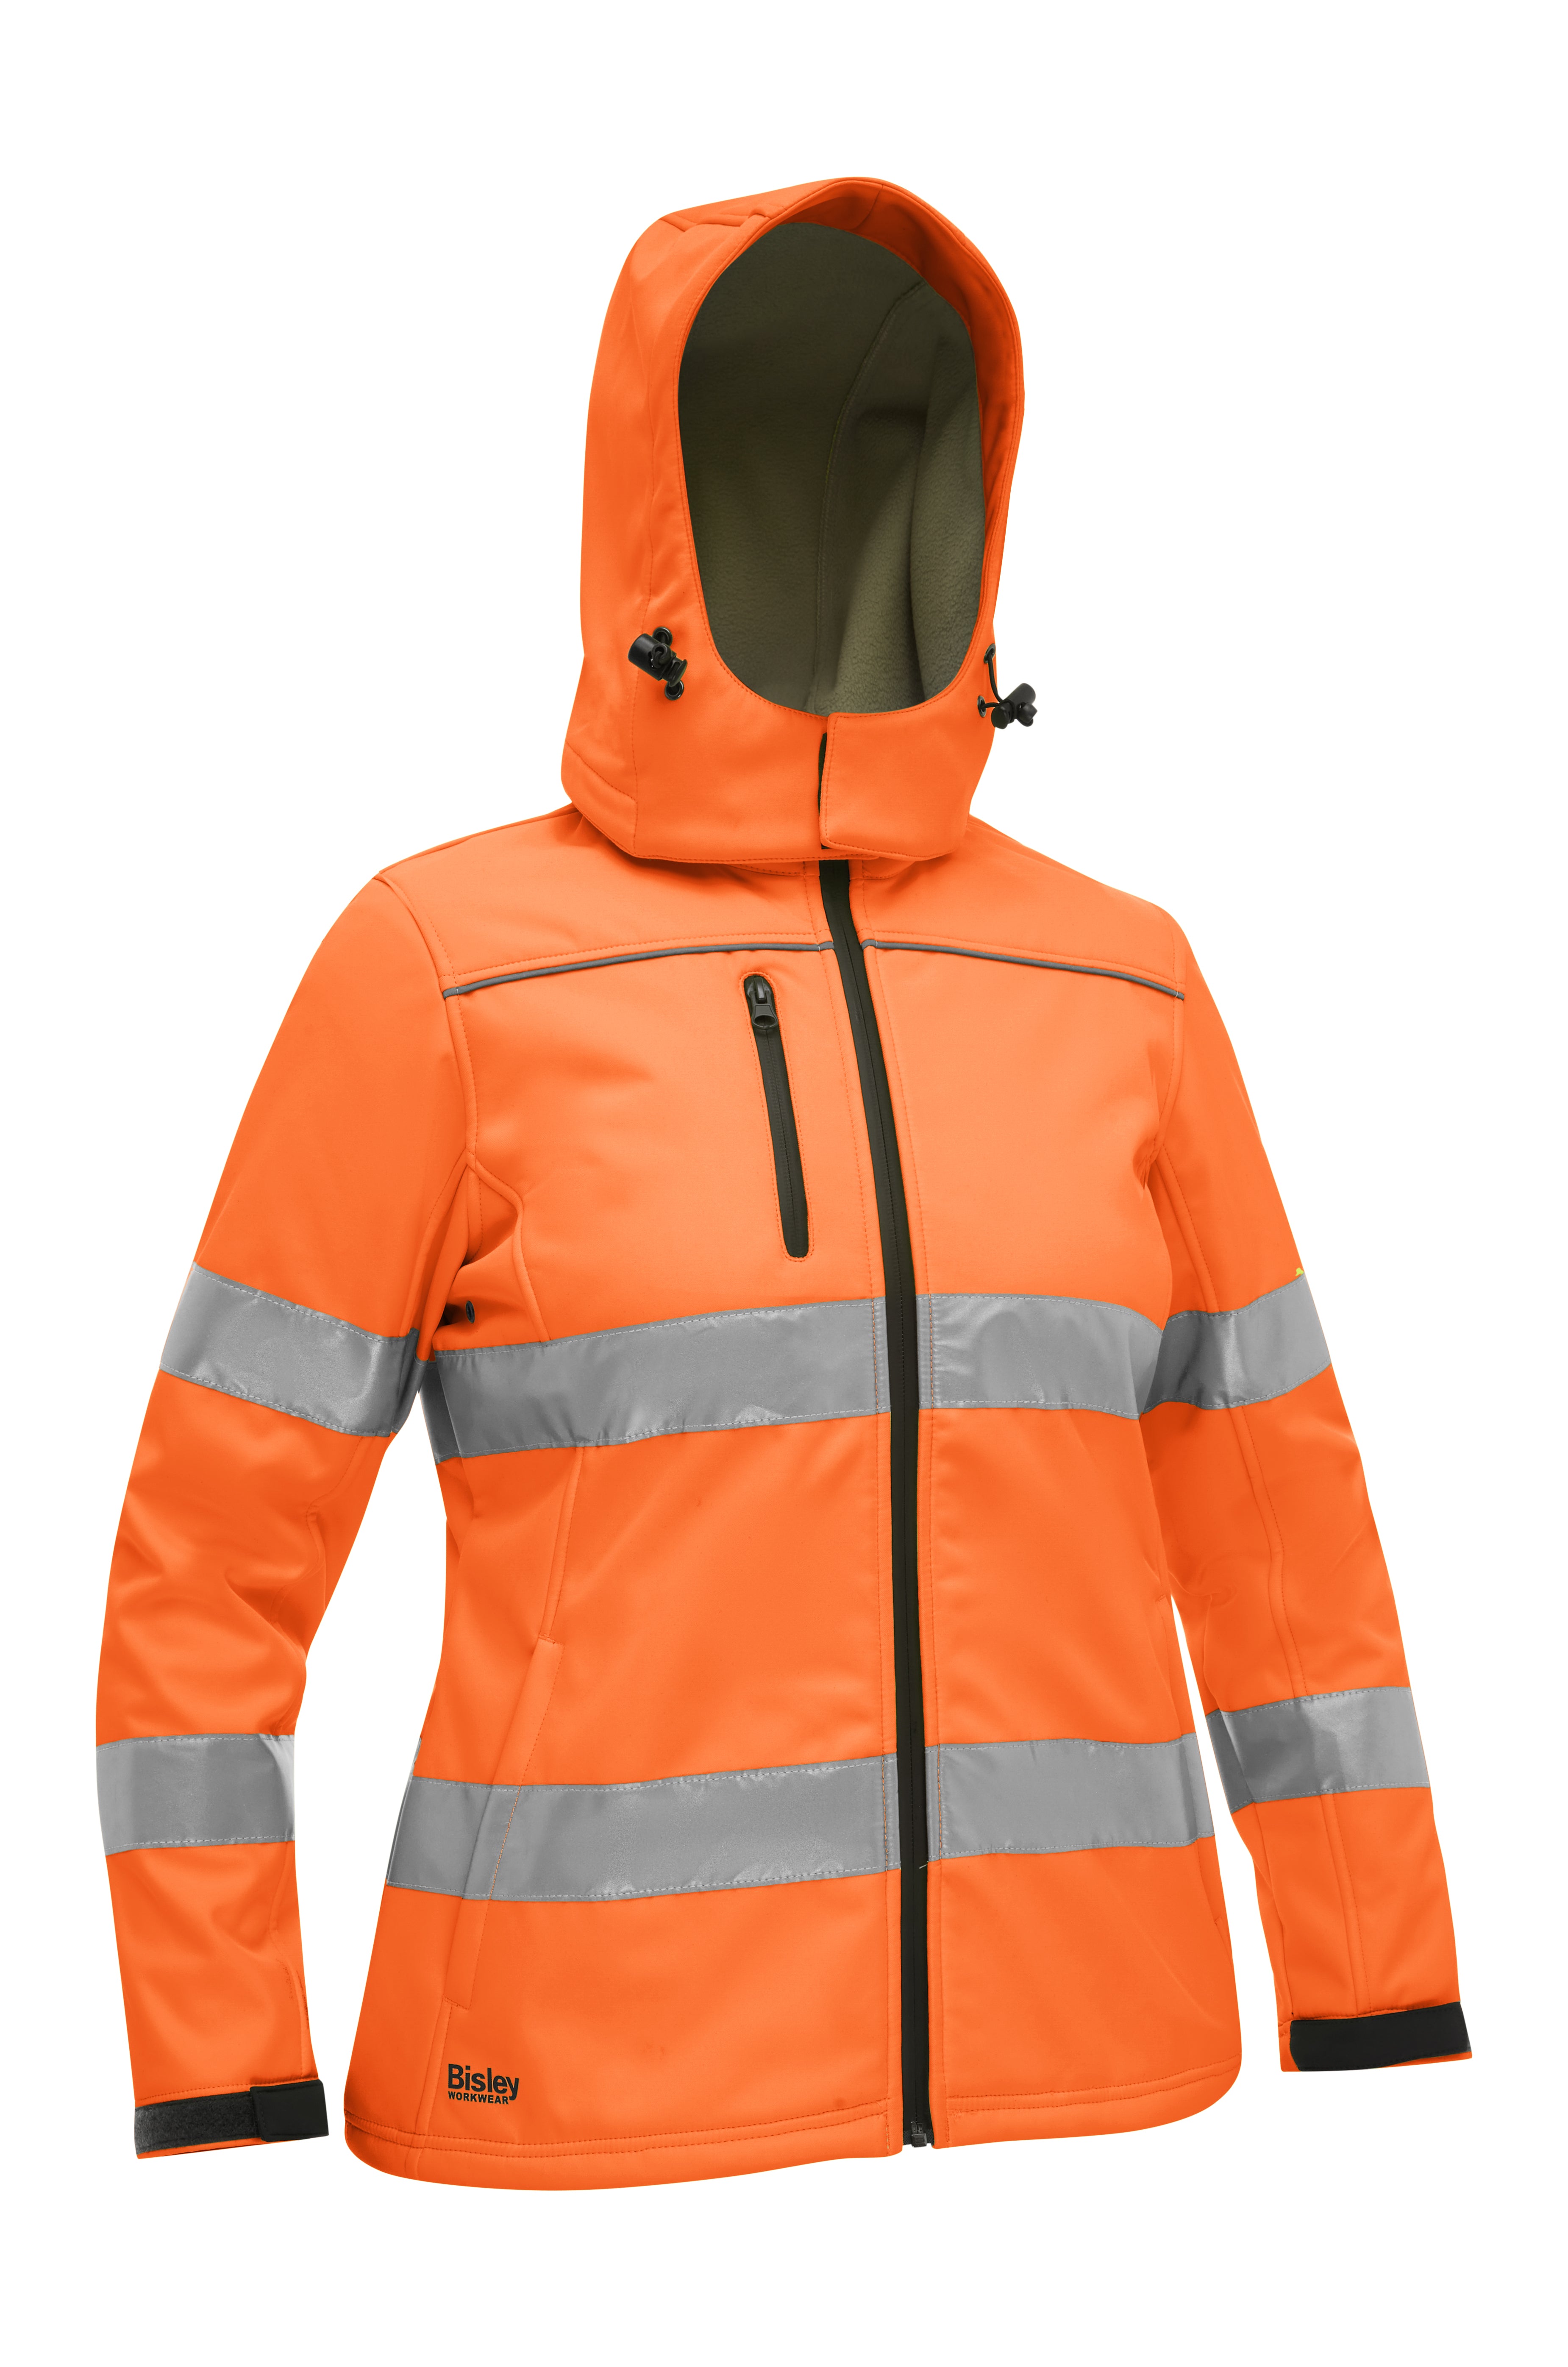 WOMEN’S TAPED HI VIS SOFT SHELL JACKET WITH HOOD